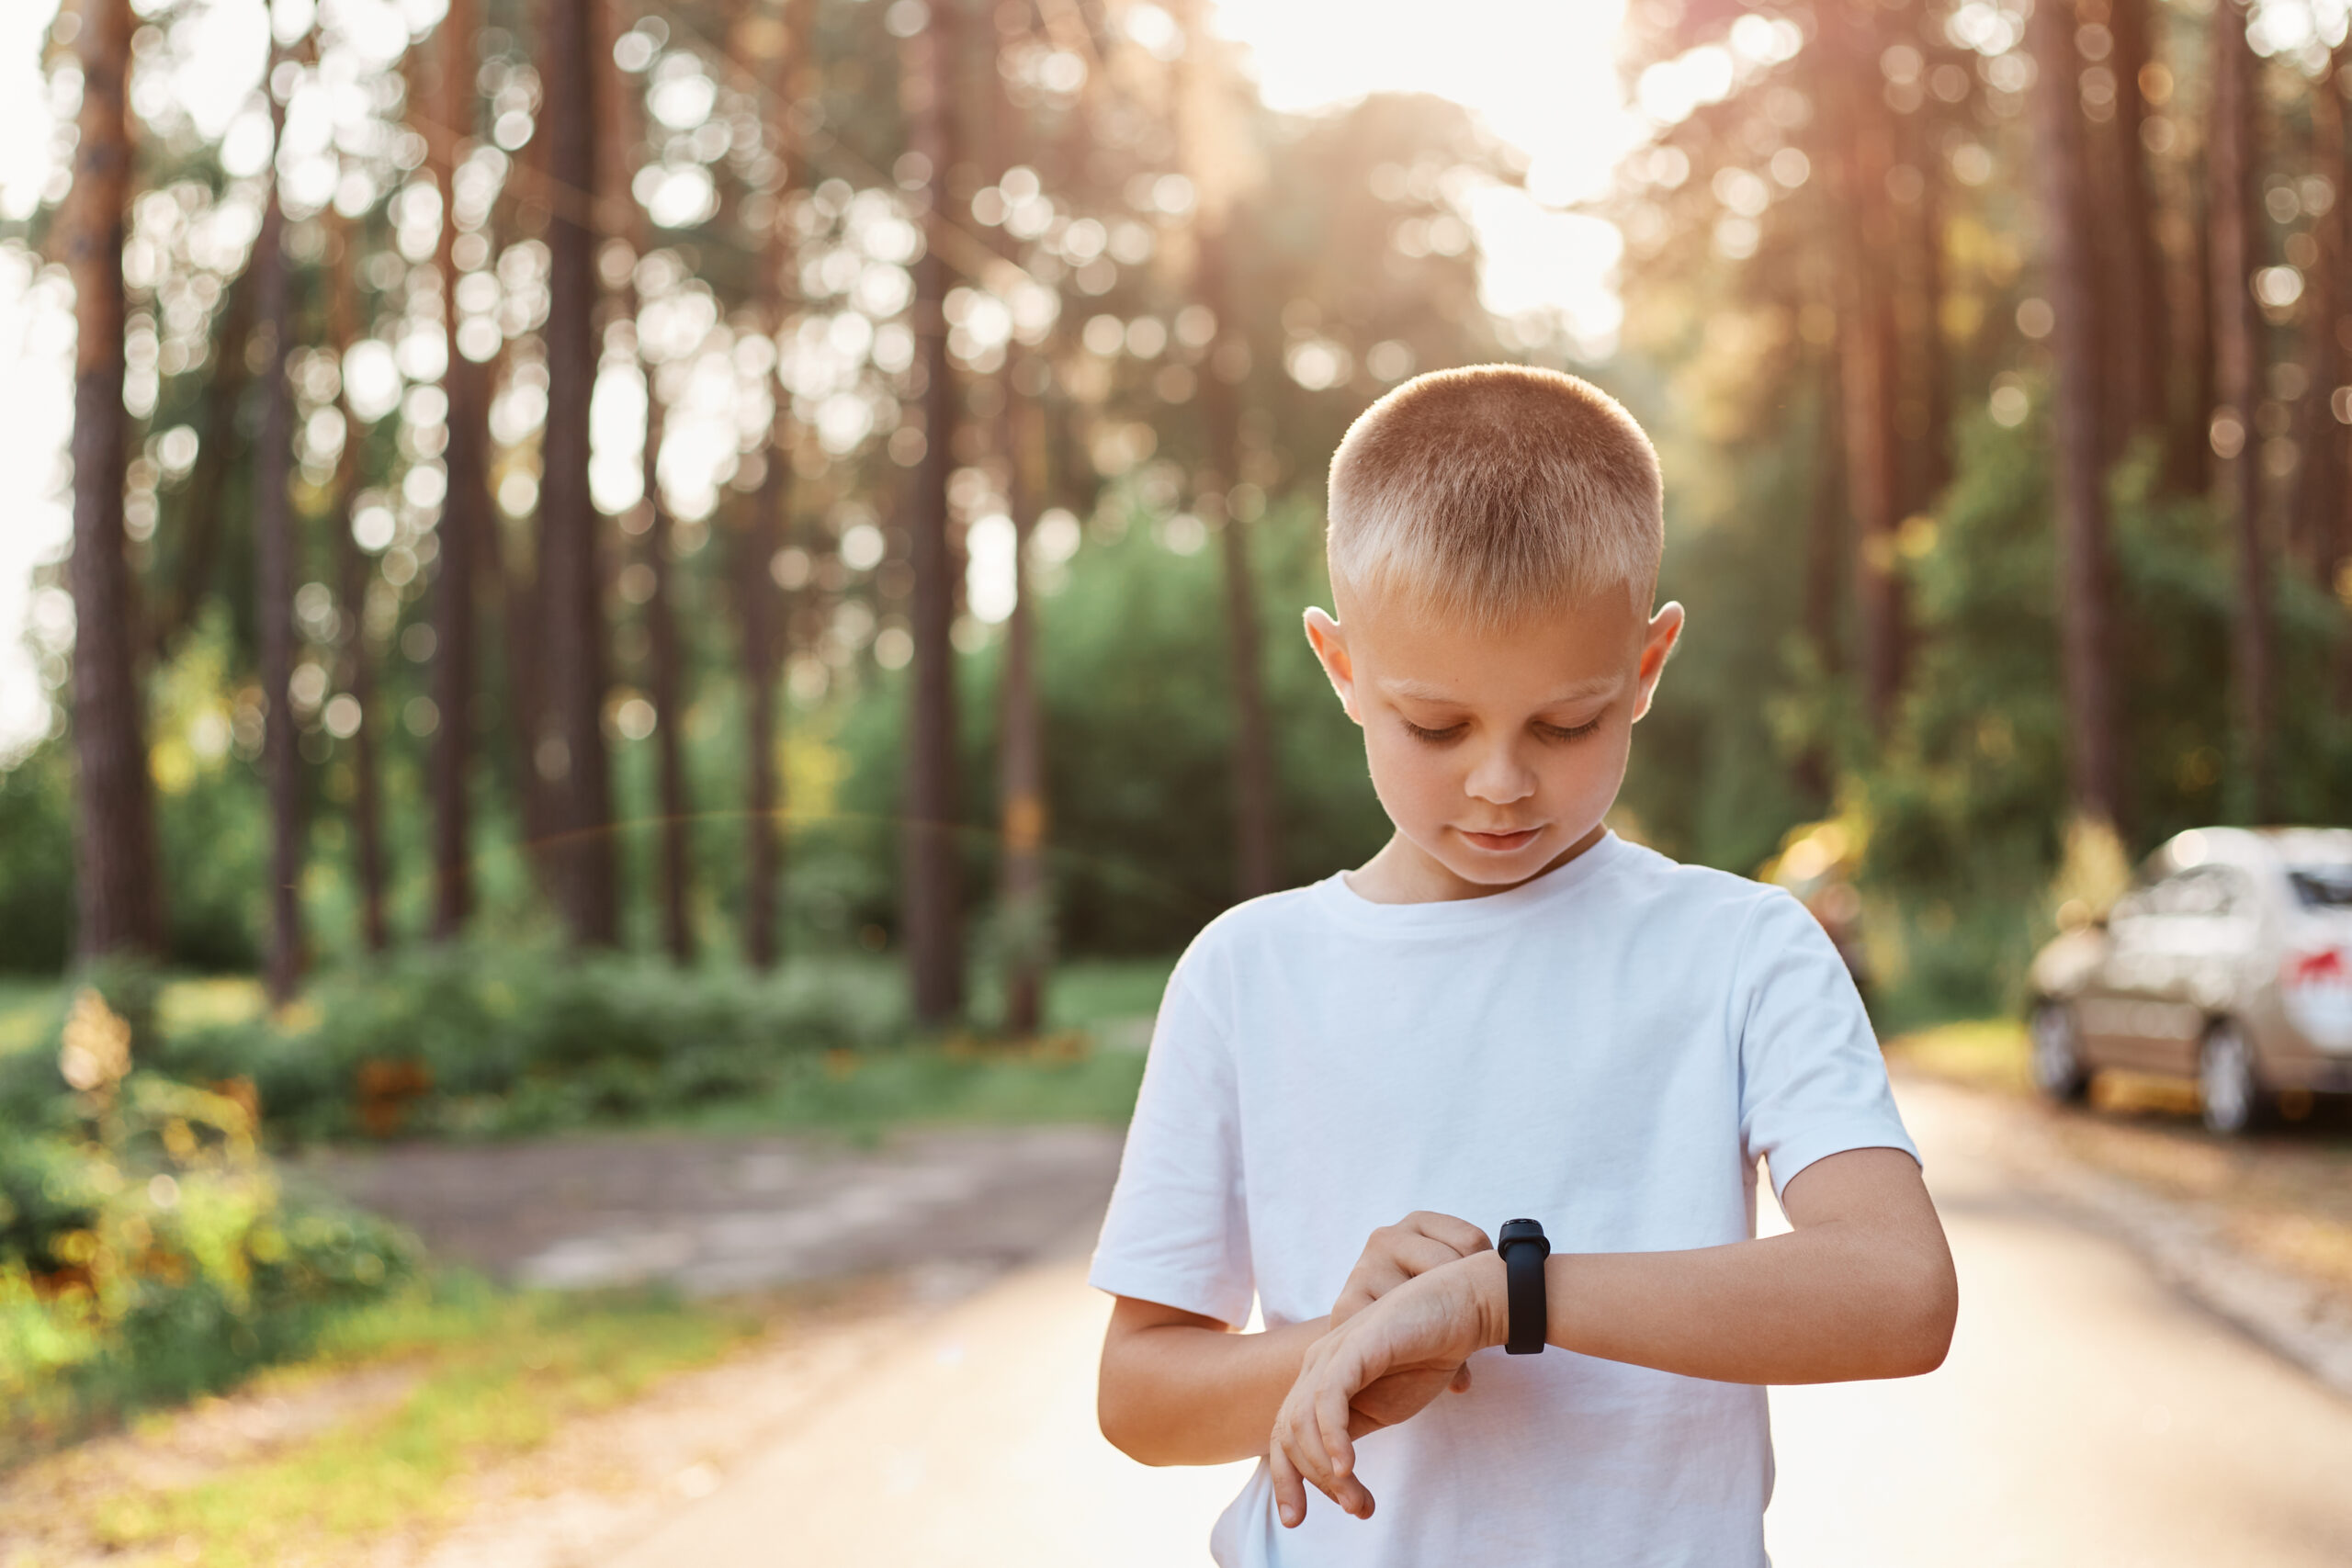 Little blonde boy using fitness bend touching button and touchscreen while posing outdoor in park